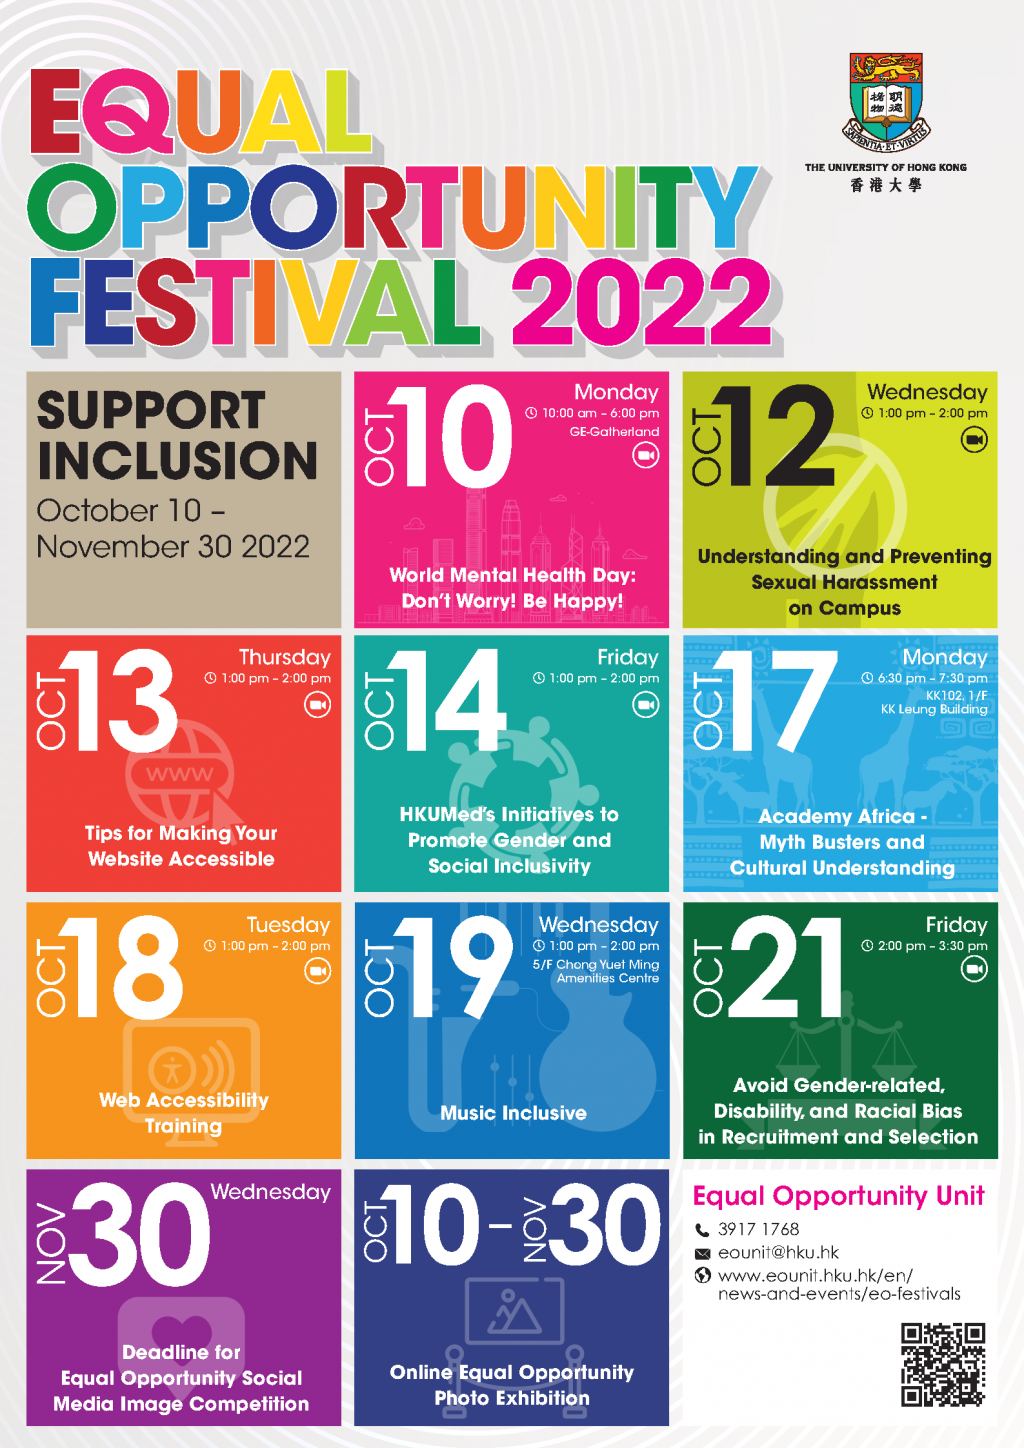 The Equal Opportunity Festival 2022, with the theme 